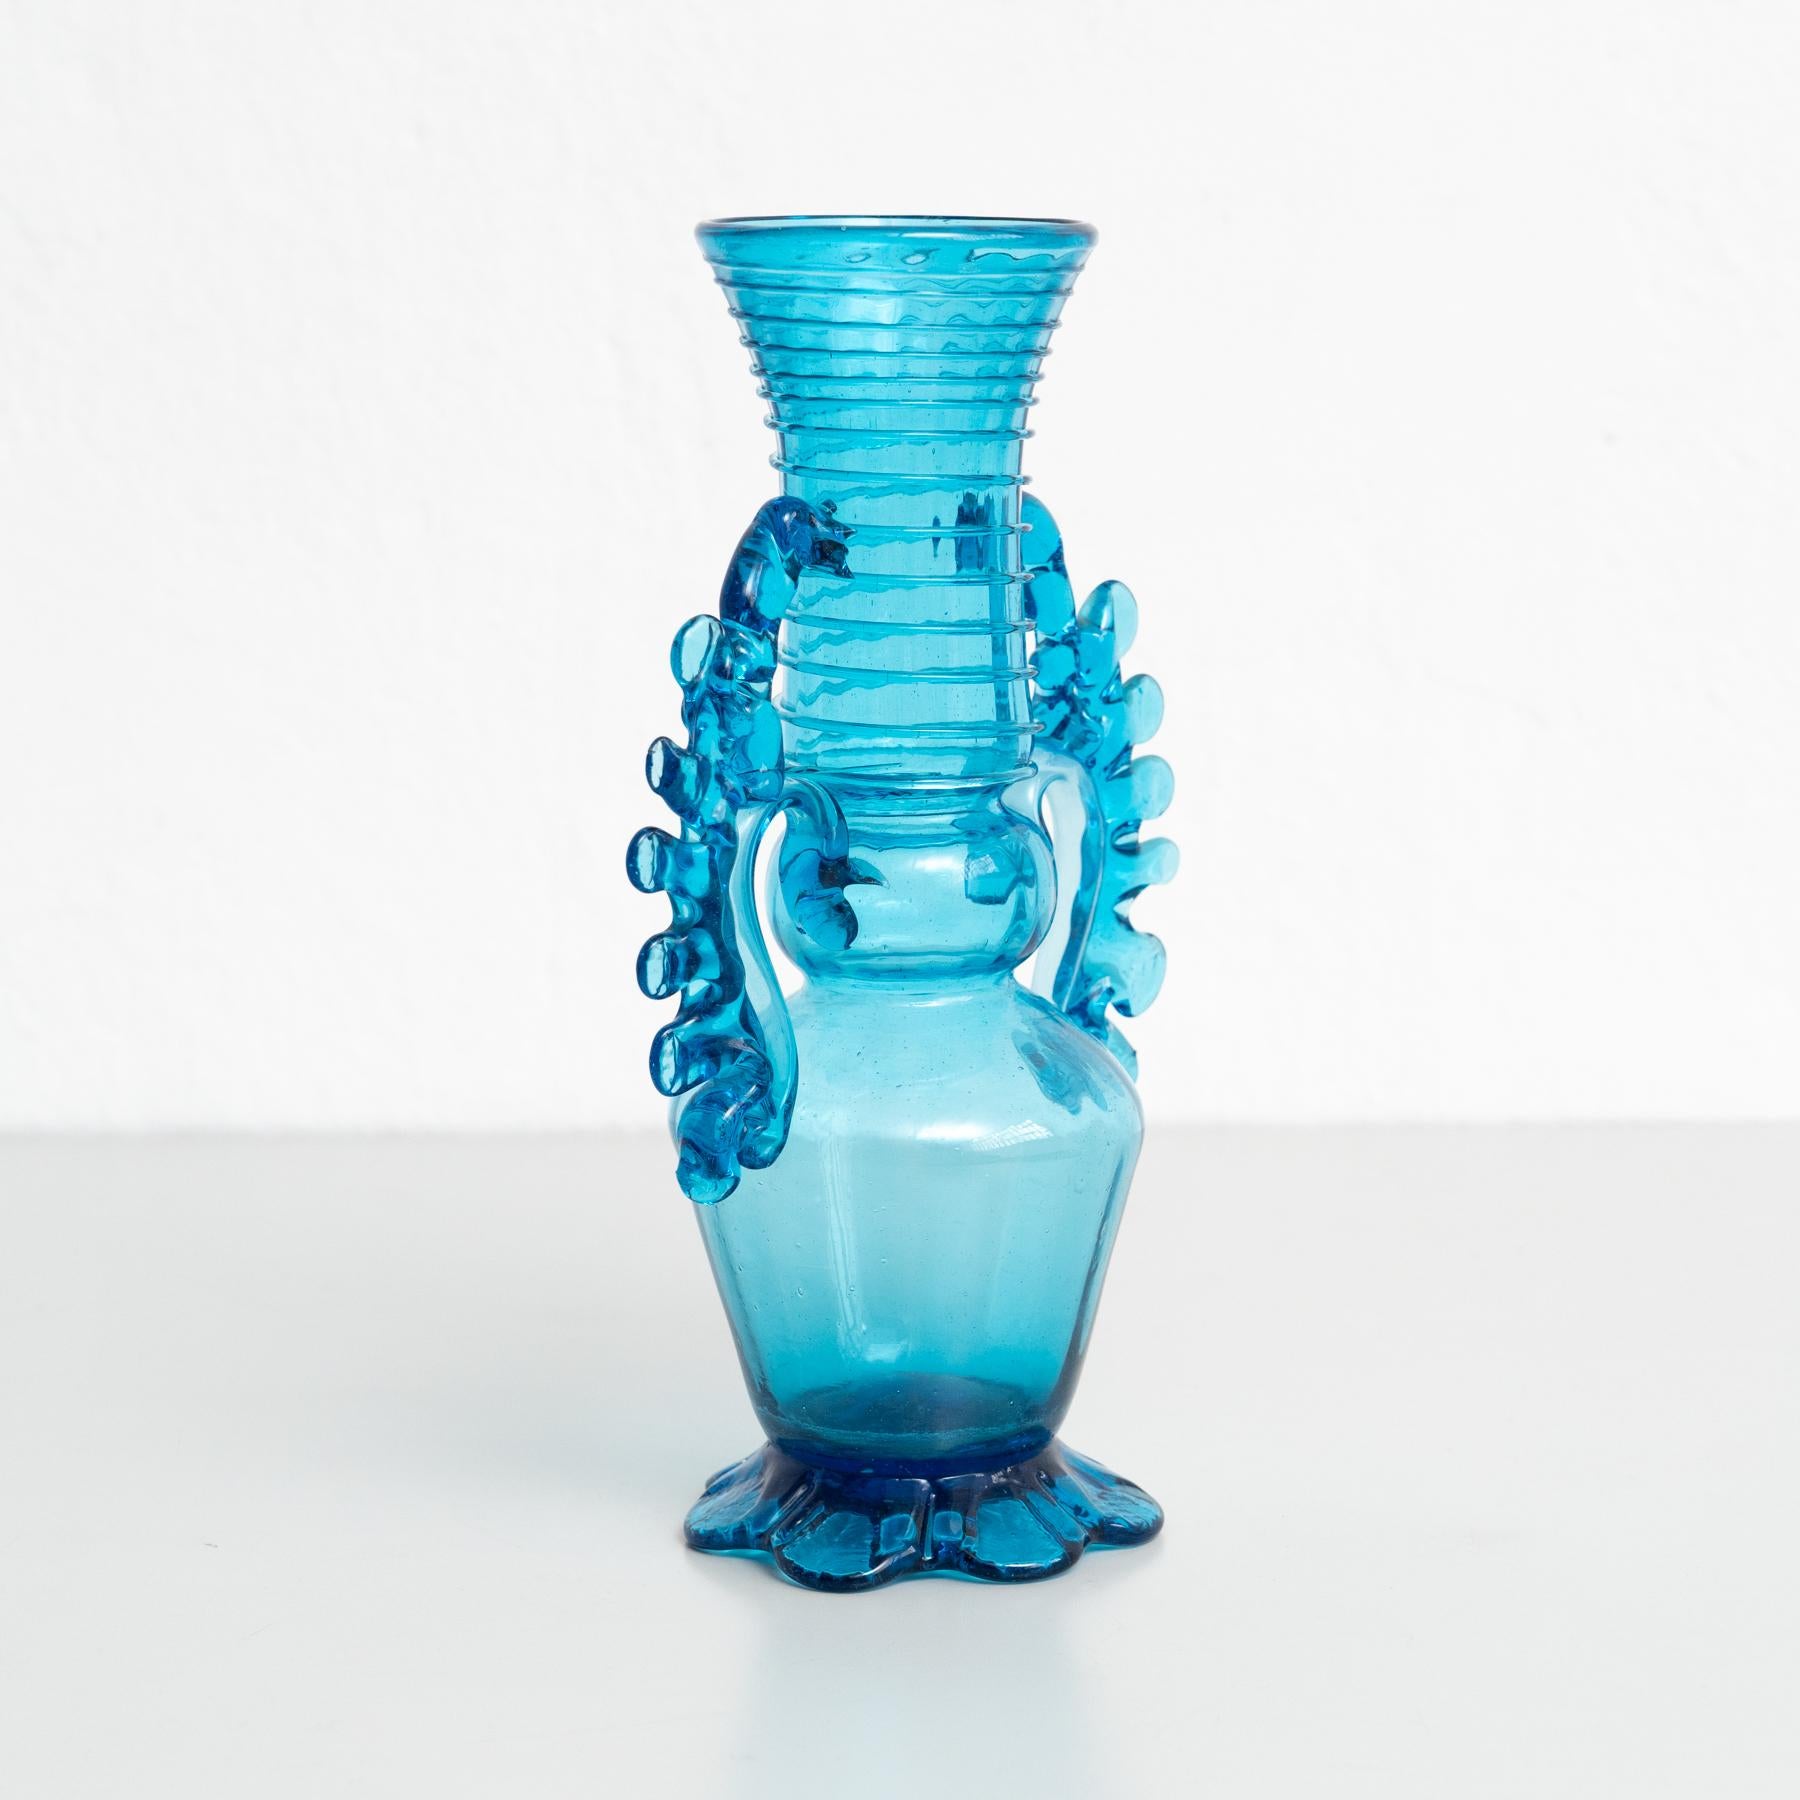 Exceptional Blown Glass Vase - Early XXth Century - Spanish Craftsmanship For Sale 1